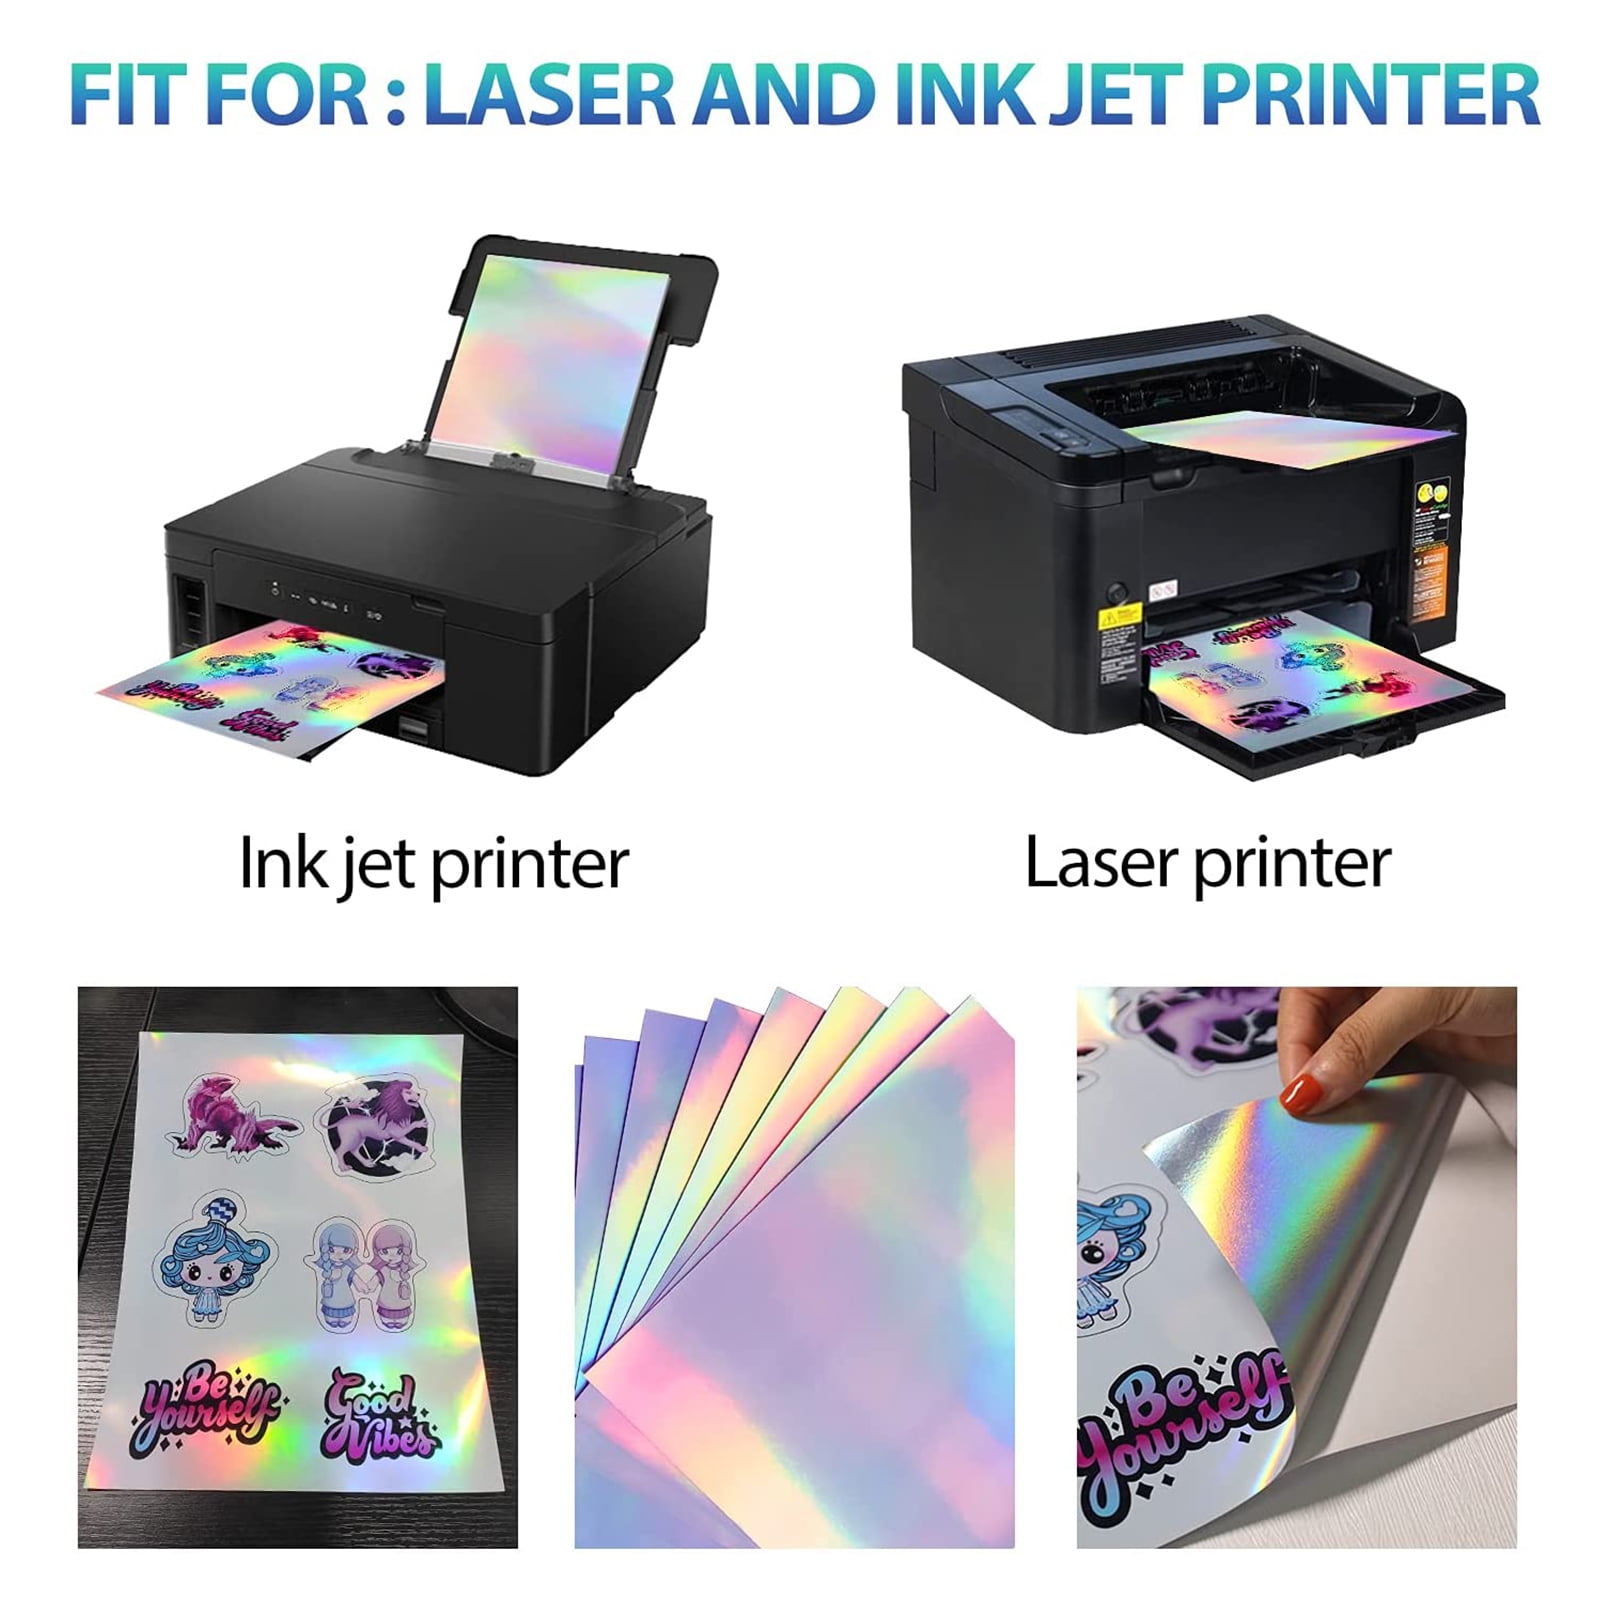 50 Sheets Holographic Sticker Paper 8.5 x11 inch for Inkjet US letter size Holographic Printable Vinyl Rainbow Sticker Printer Paper Adhesive Waterproof Vinyl 